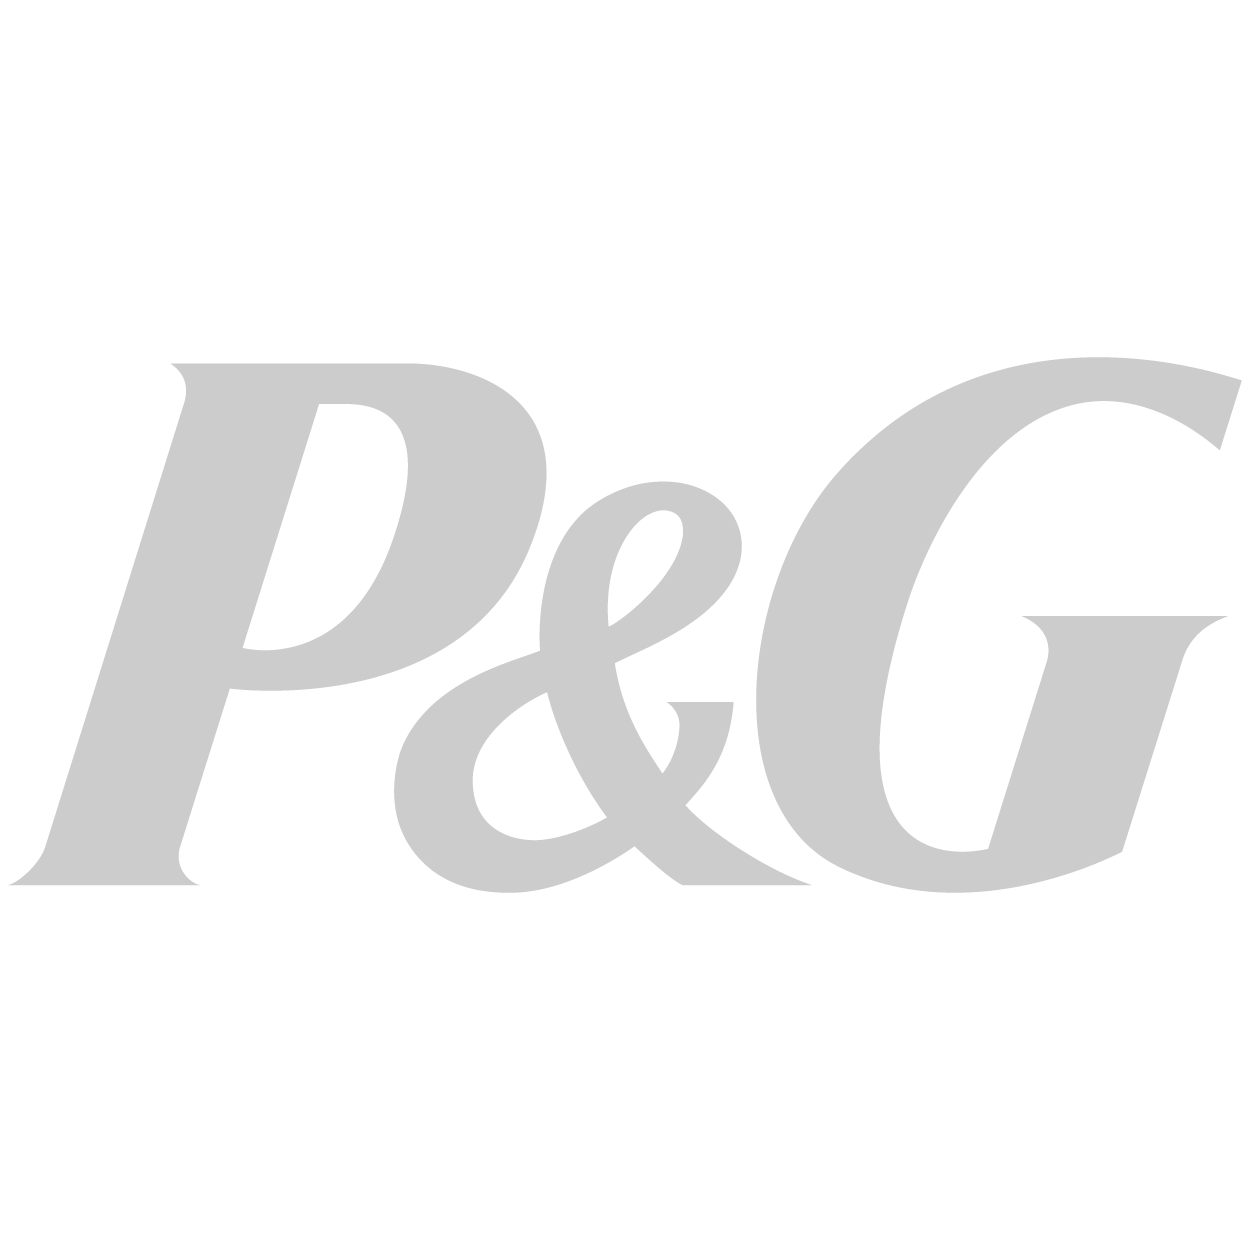 P&G-01.png